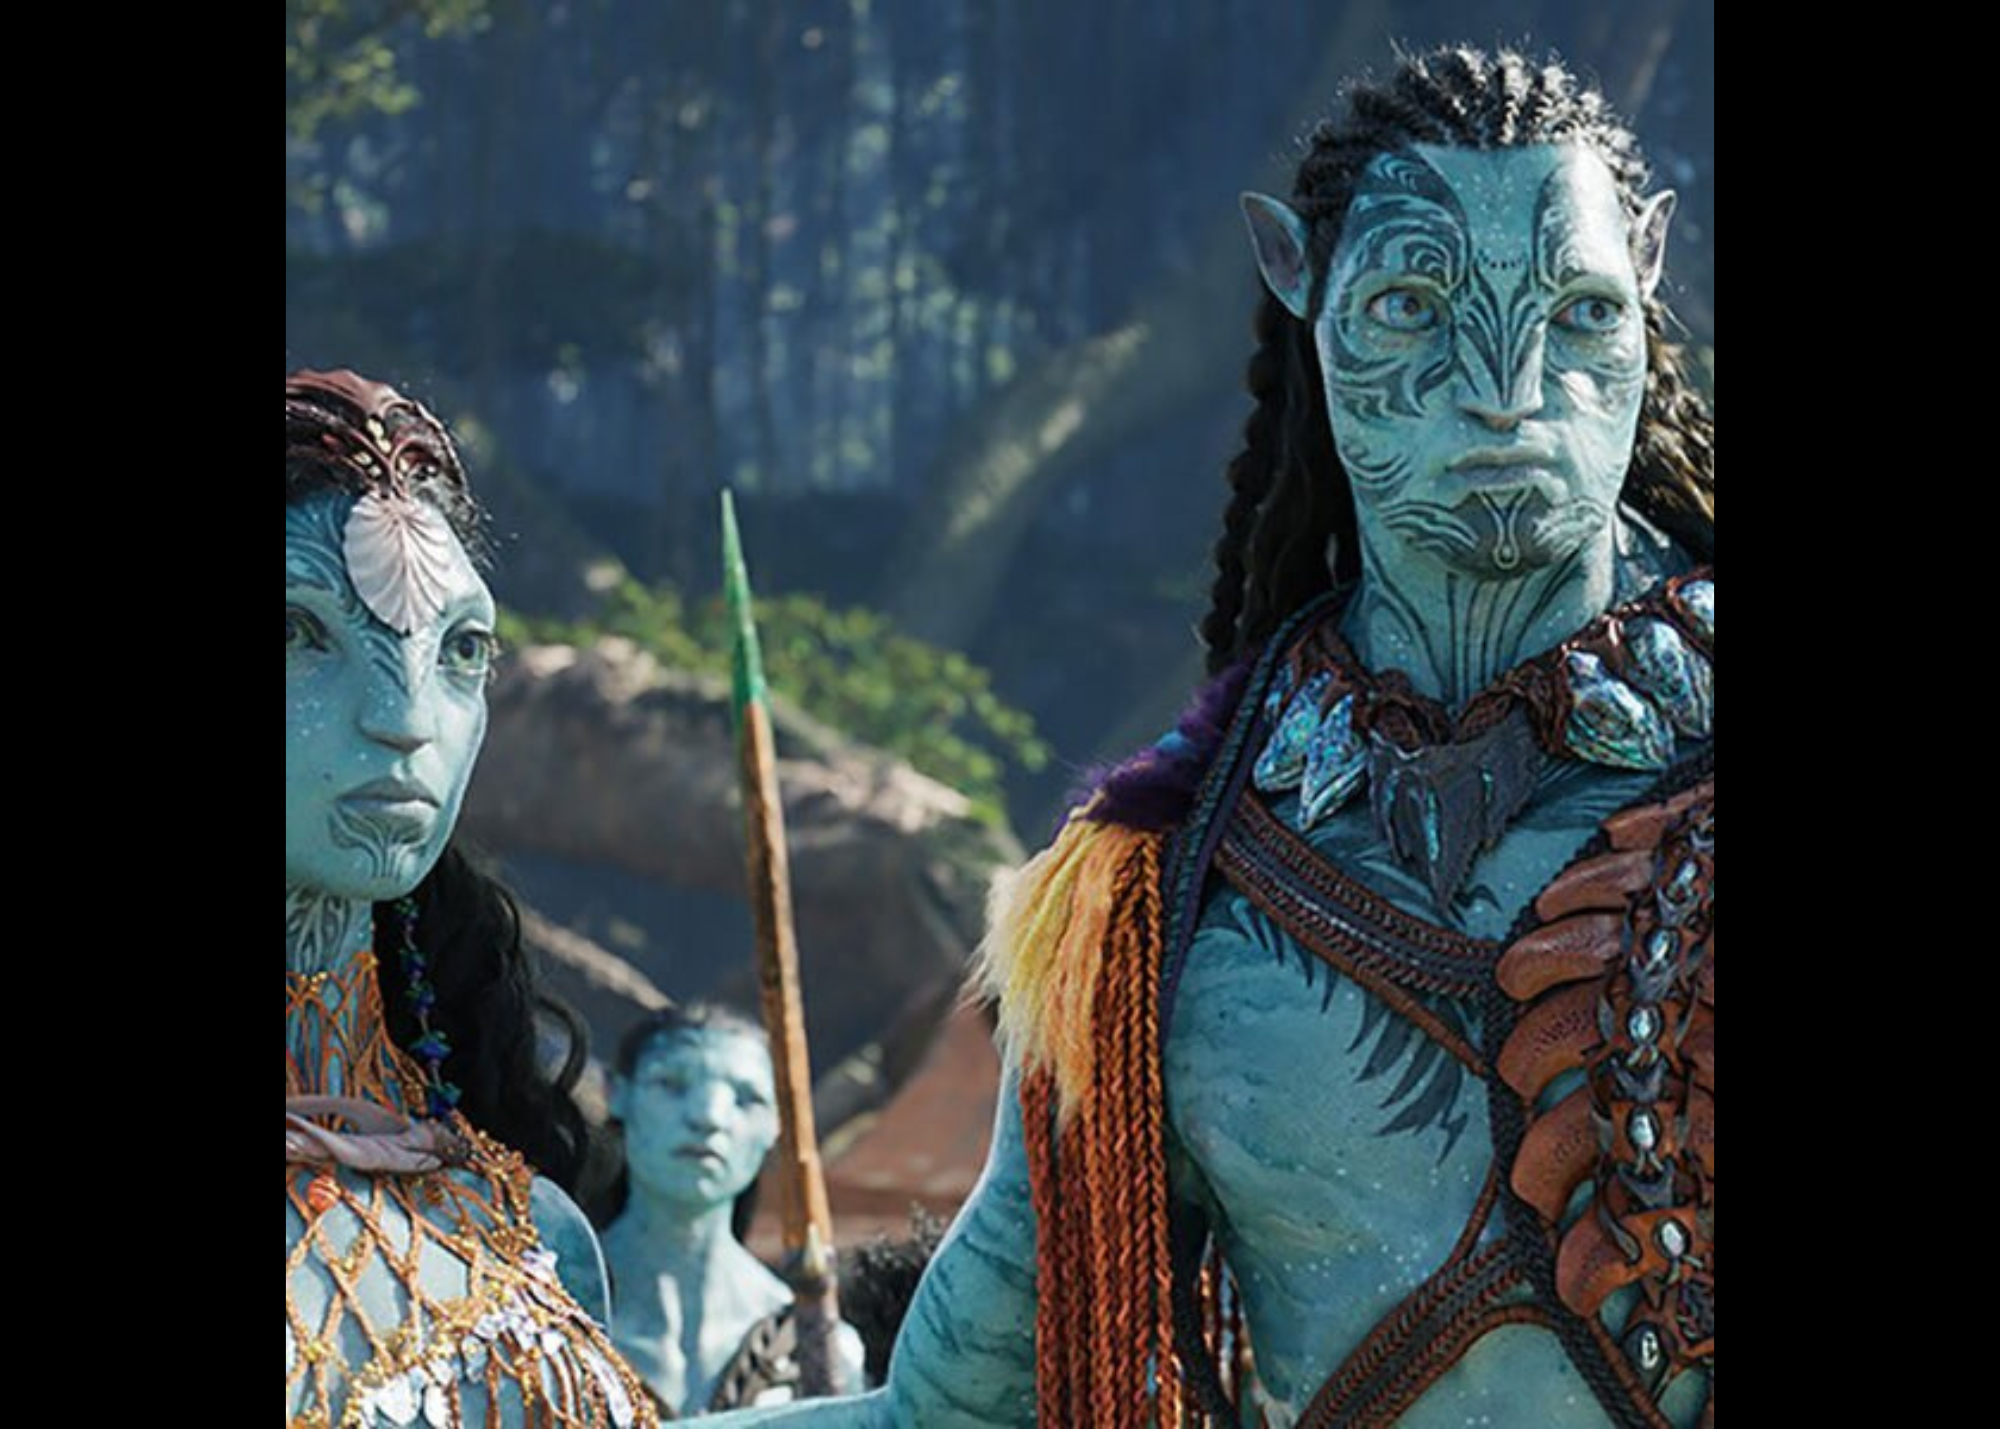 Film Review: Avatar: The Way of Water – Josh at the Movies